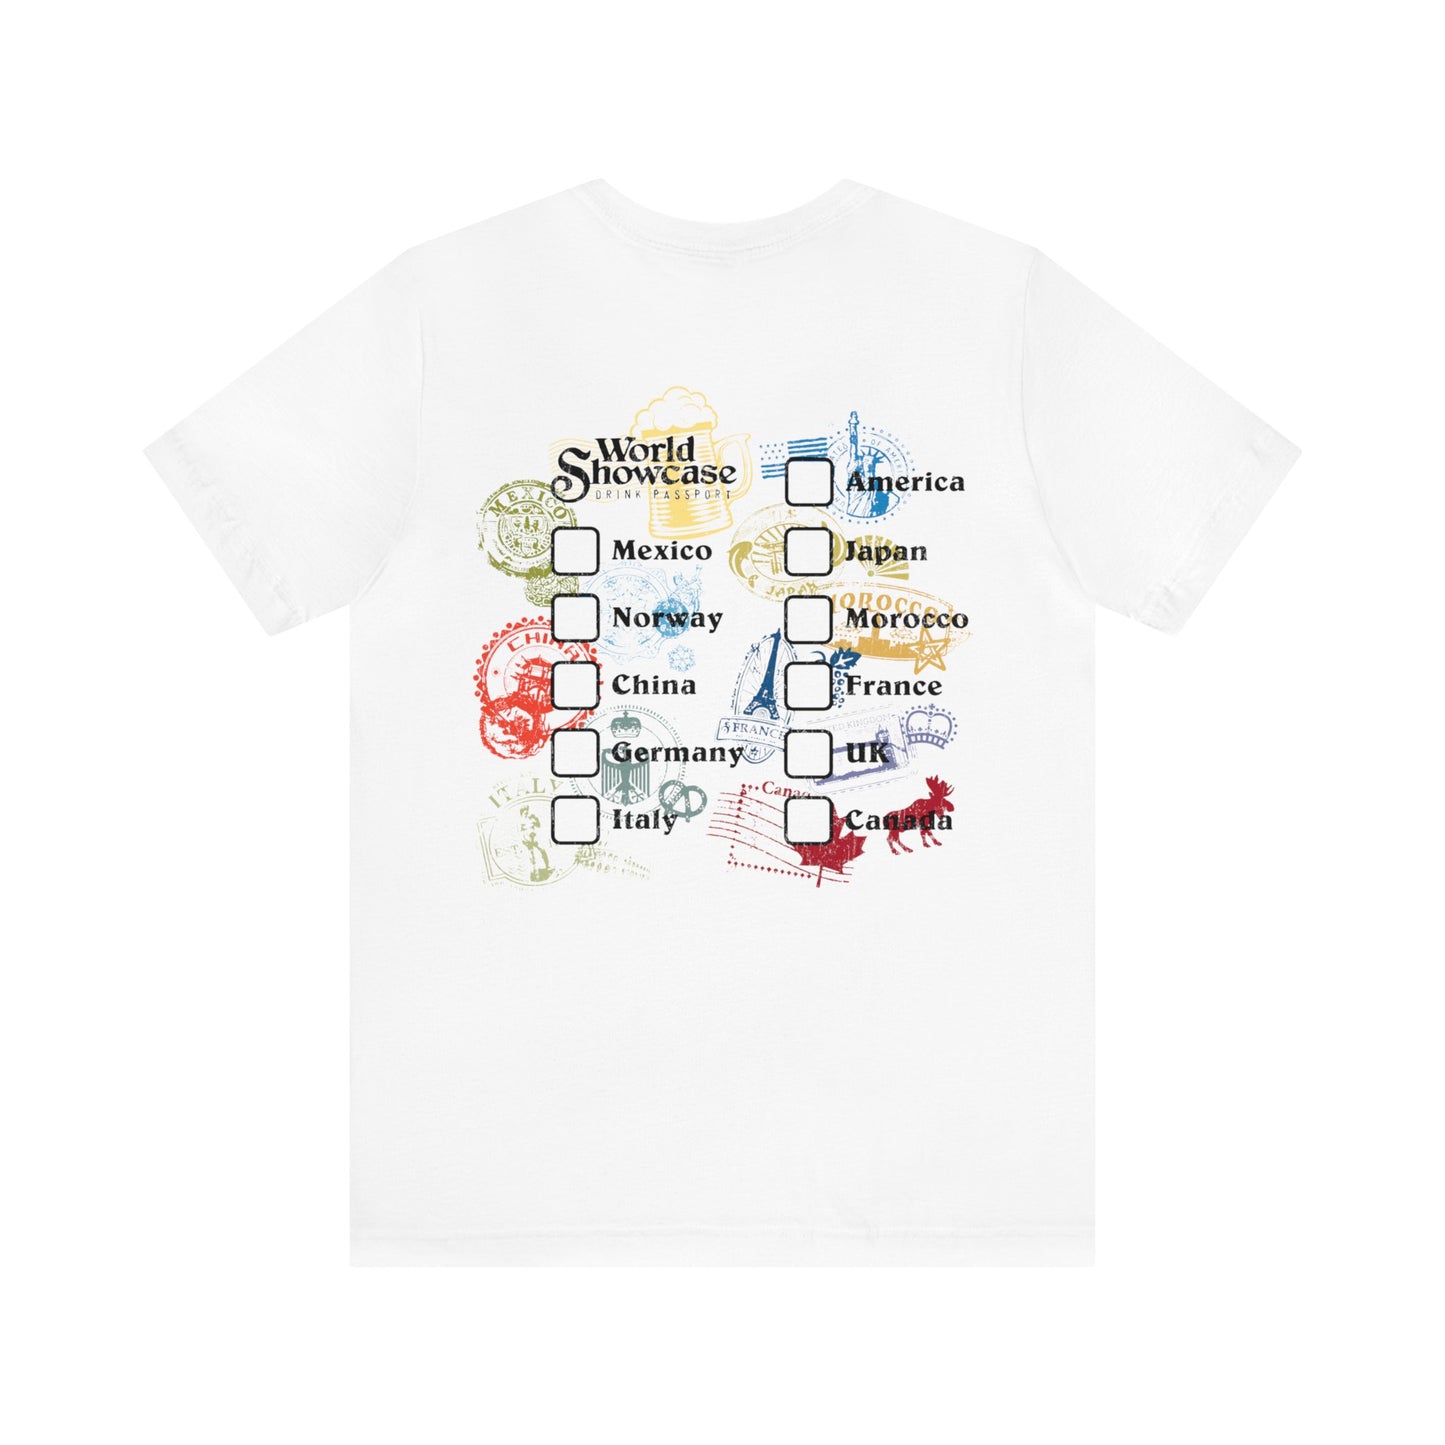 Drink Around The World Unisex Graphic Tee - Multiple Colors